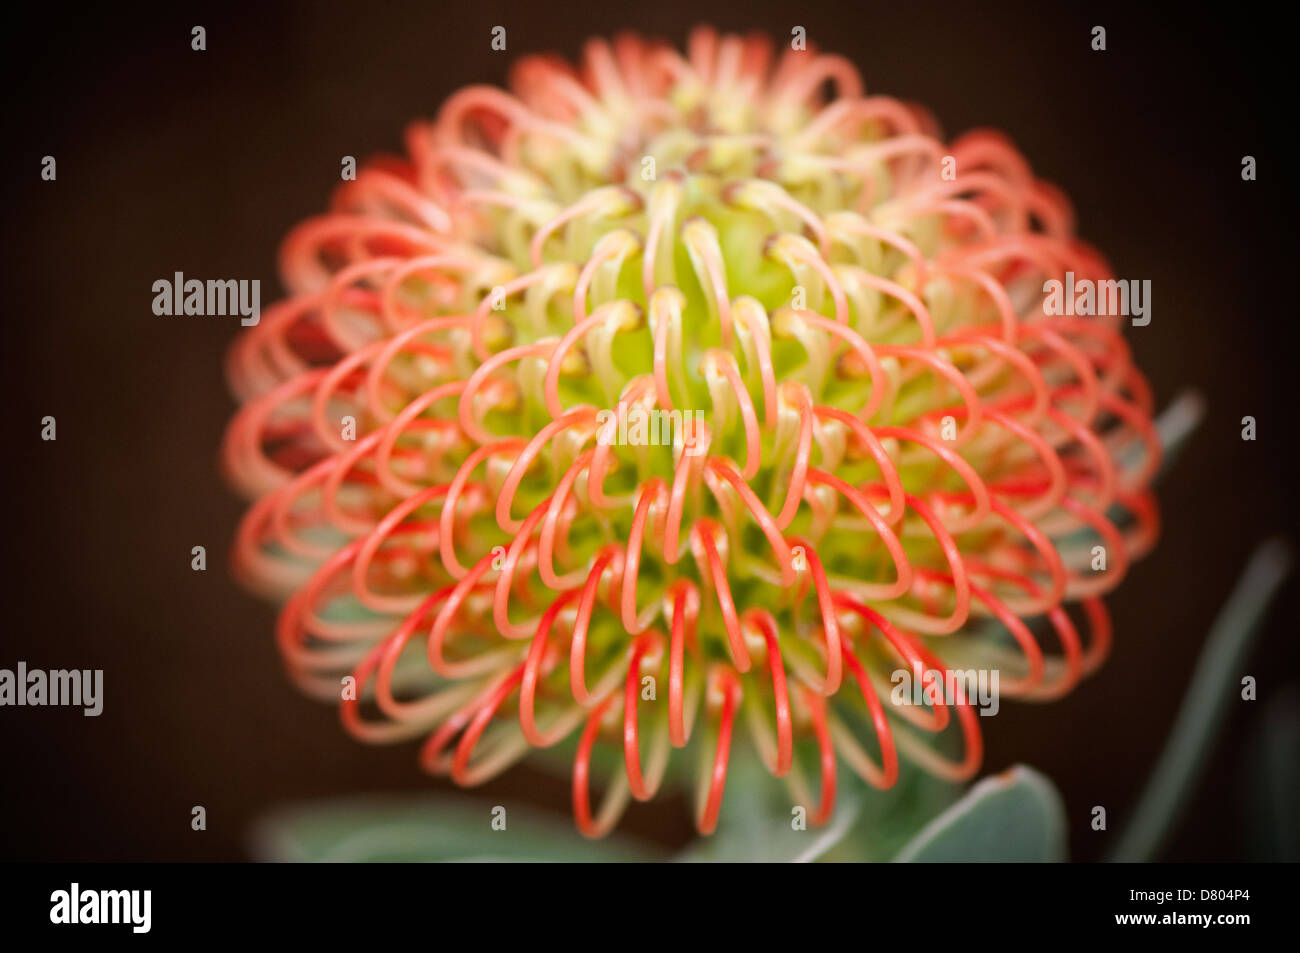 Close-up 'macro' image showing a newly formed Protea flower head, (spider or pin cushion flower). Stock Photo